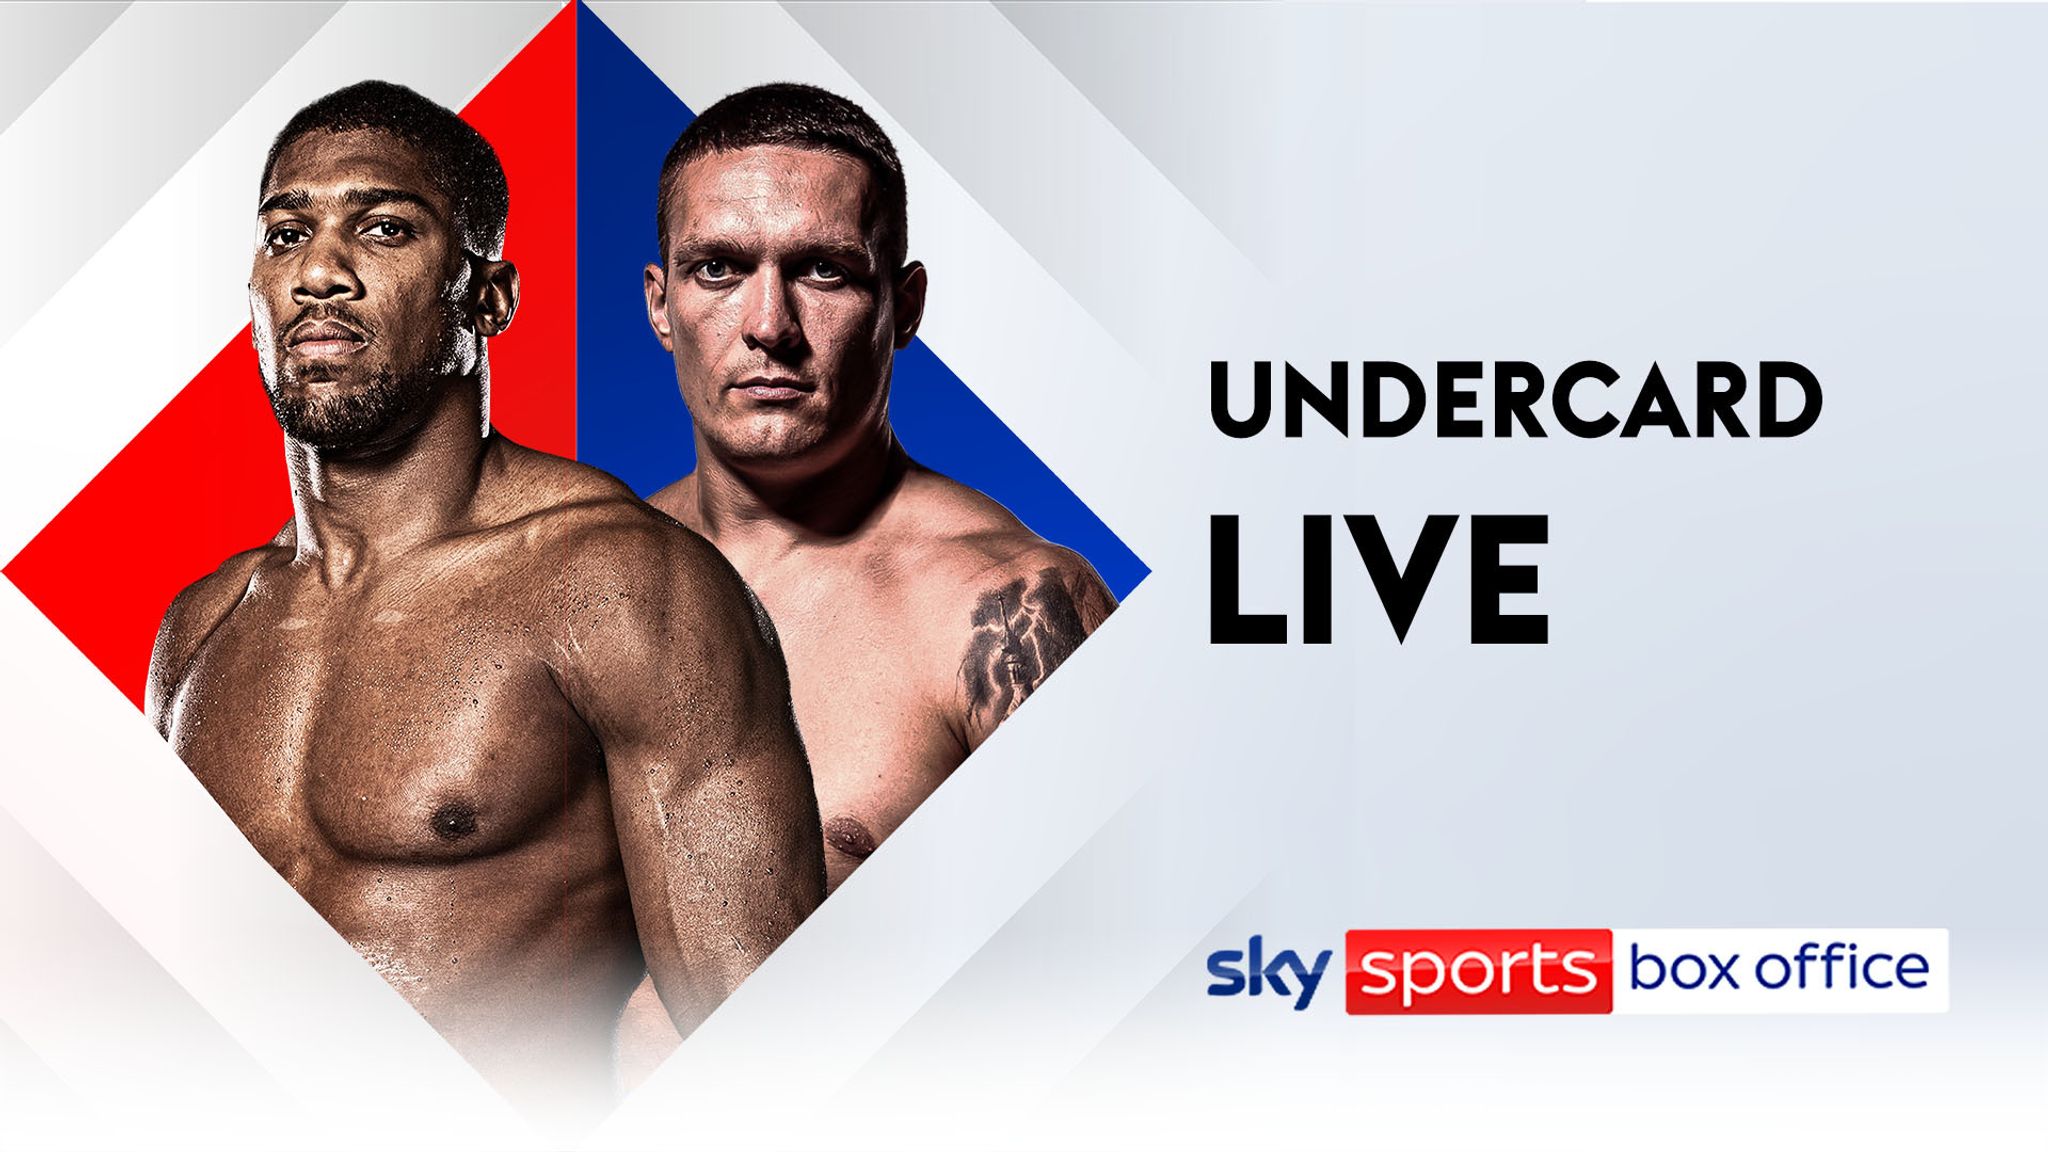 Usyk v AJ 2 undercard LIVE! Watch British rising star Ben Whittaker in his second professional fight Boxing News Sky Sports